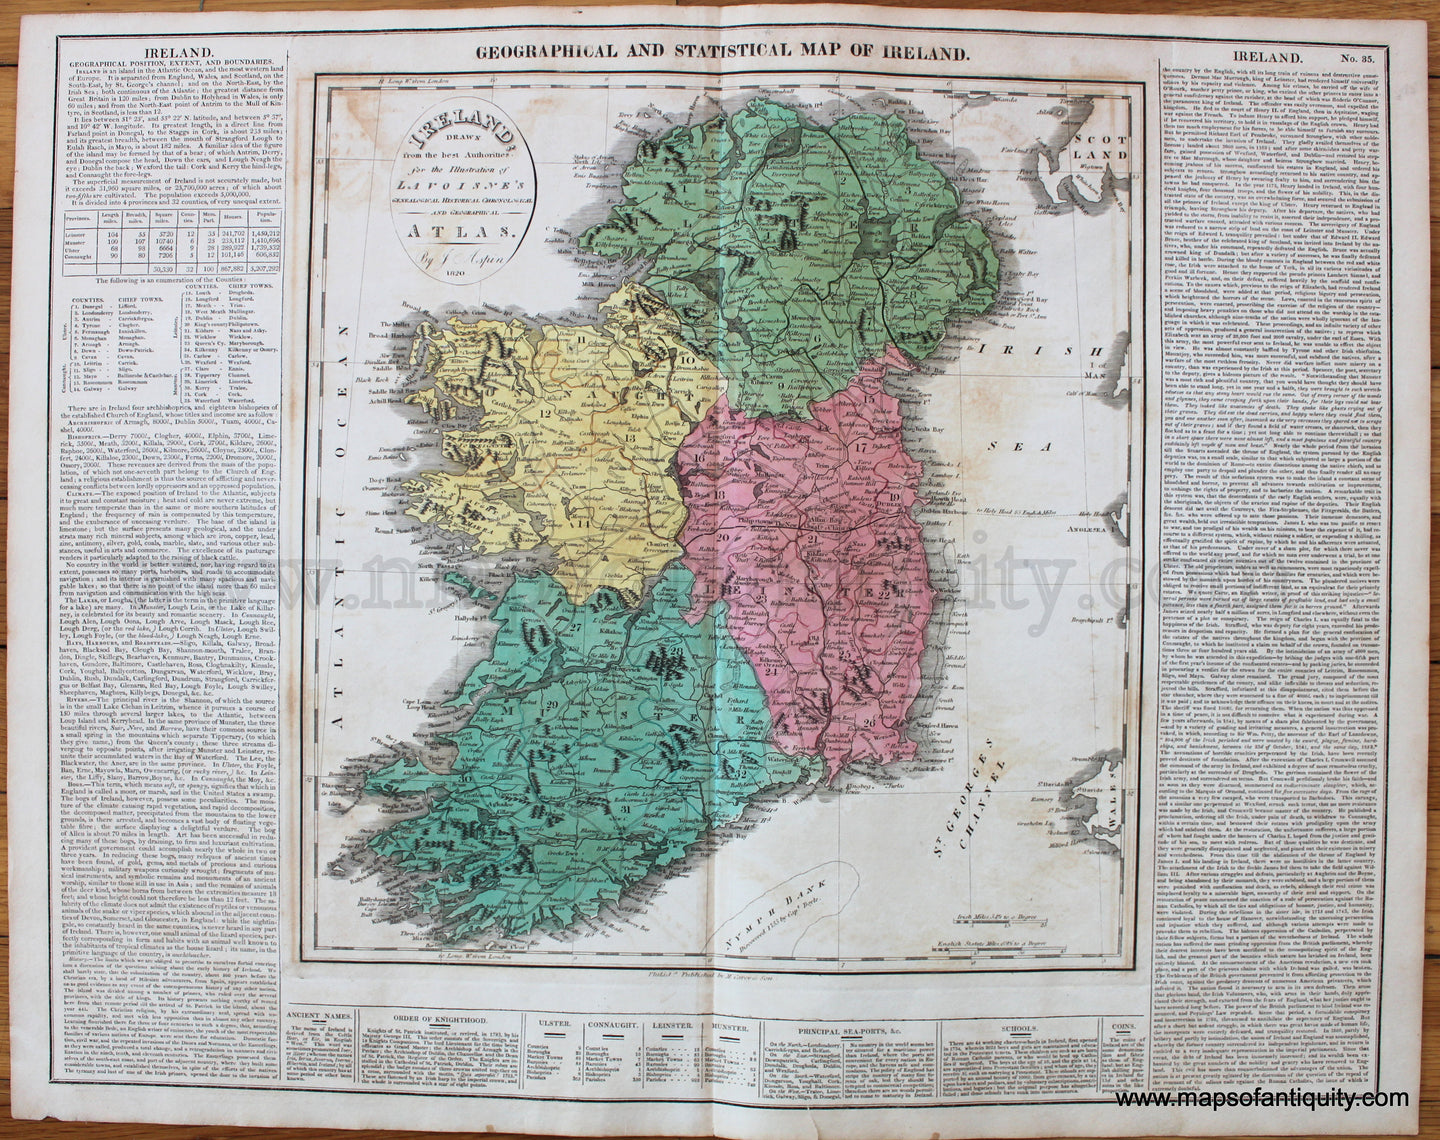 Antique-Hand-Colored-Map-Geographical-and-Statistical-Map-of-Ireland.-No.-35.--Europe-Ireland-1820-Lavoisne-Maps-Of-Antiquity